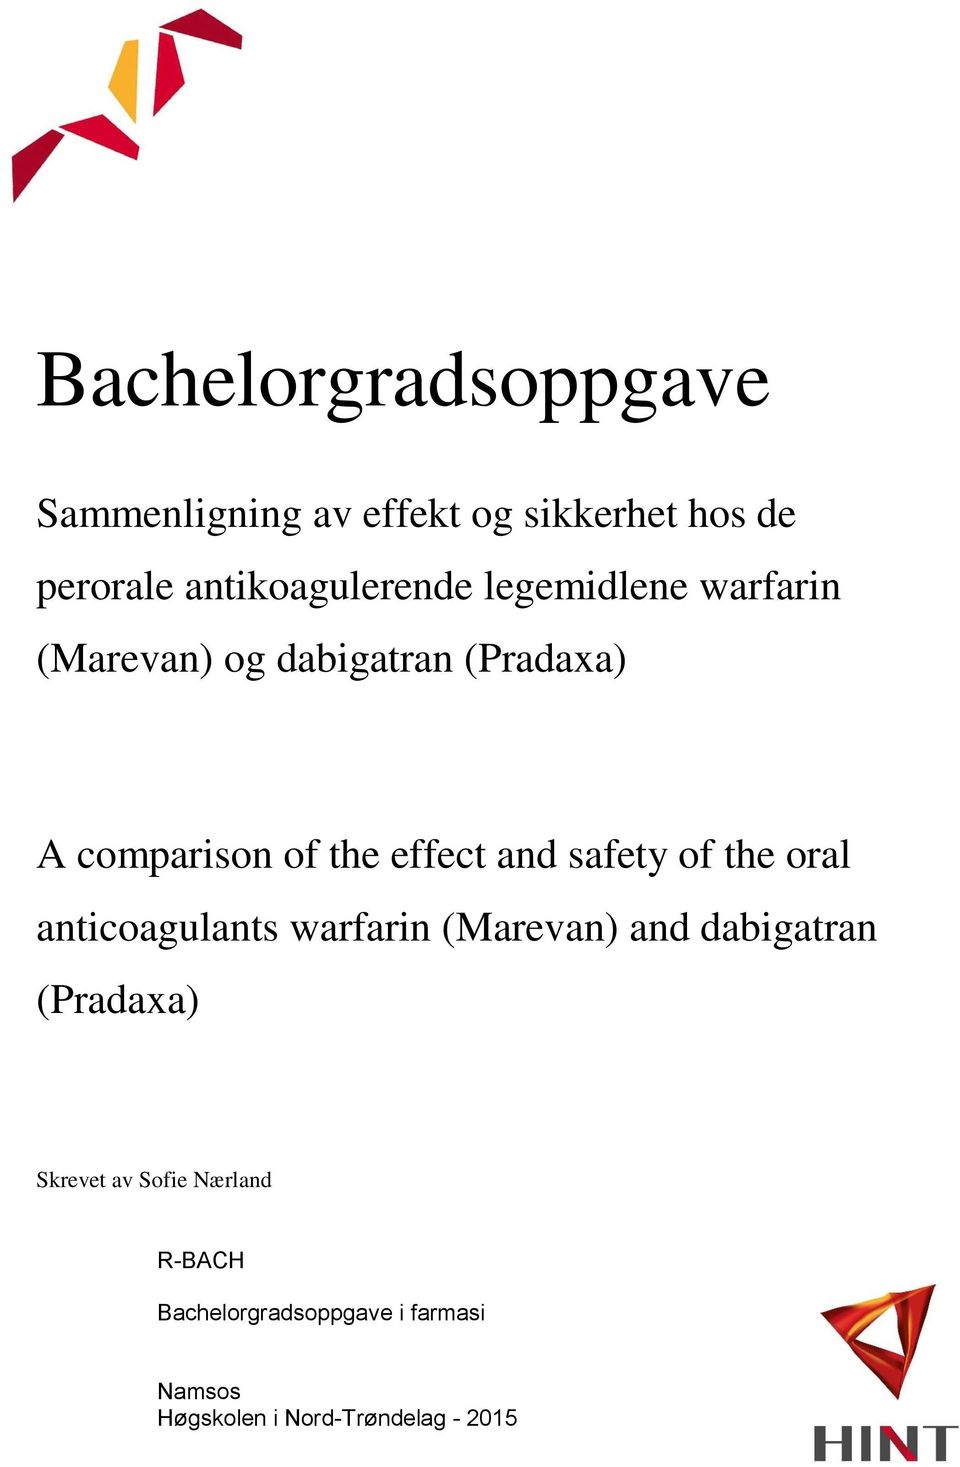 the effect and safety of the oral anticoagulants warfarin (Marevan) and dabigatran